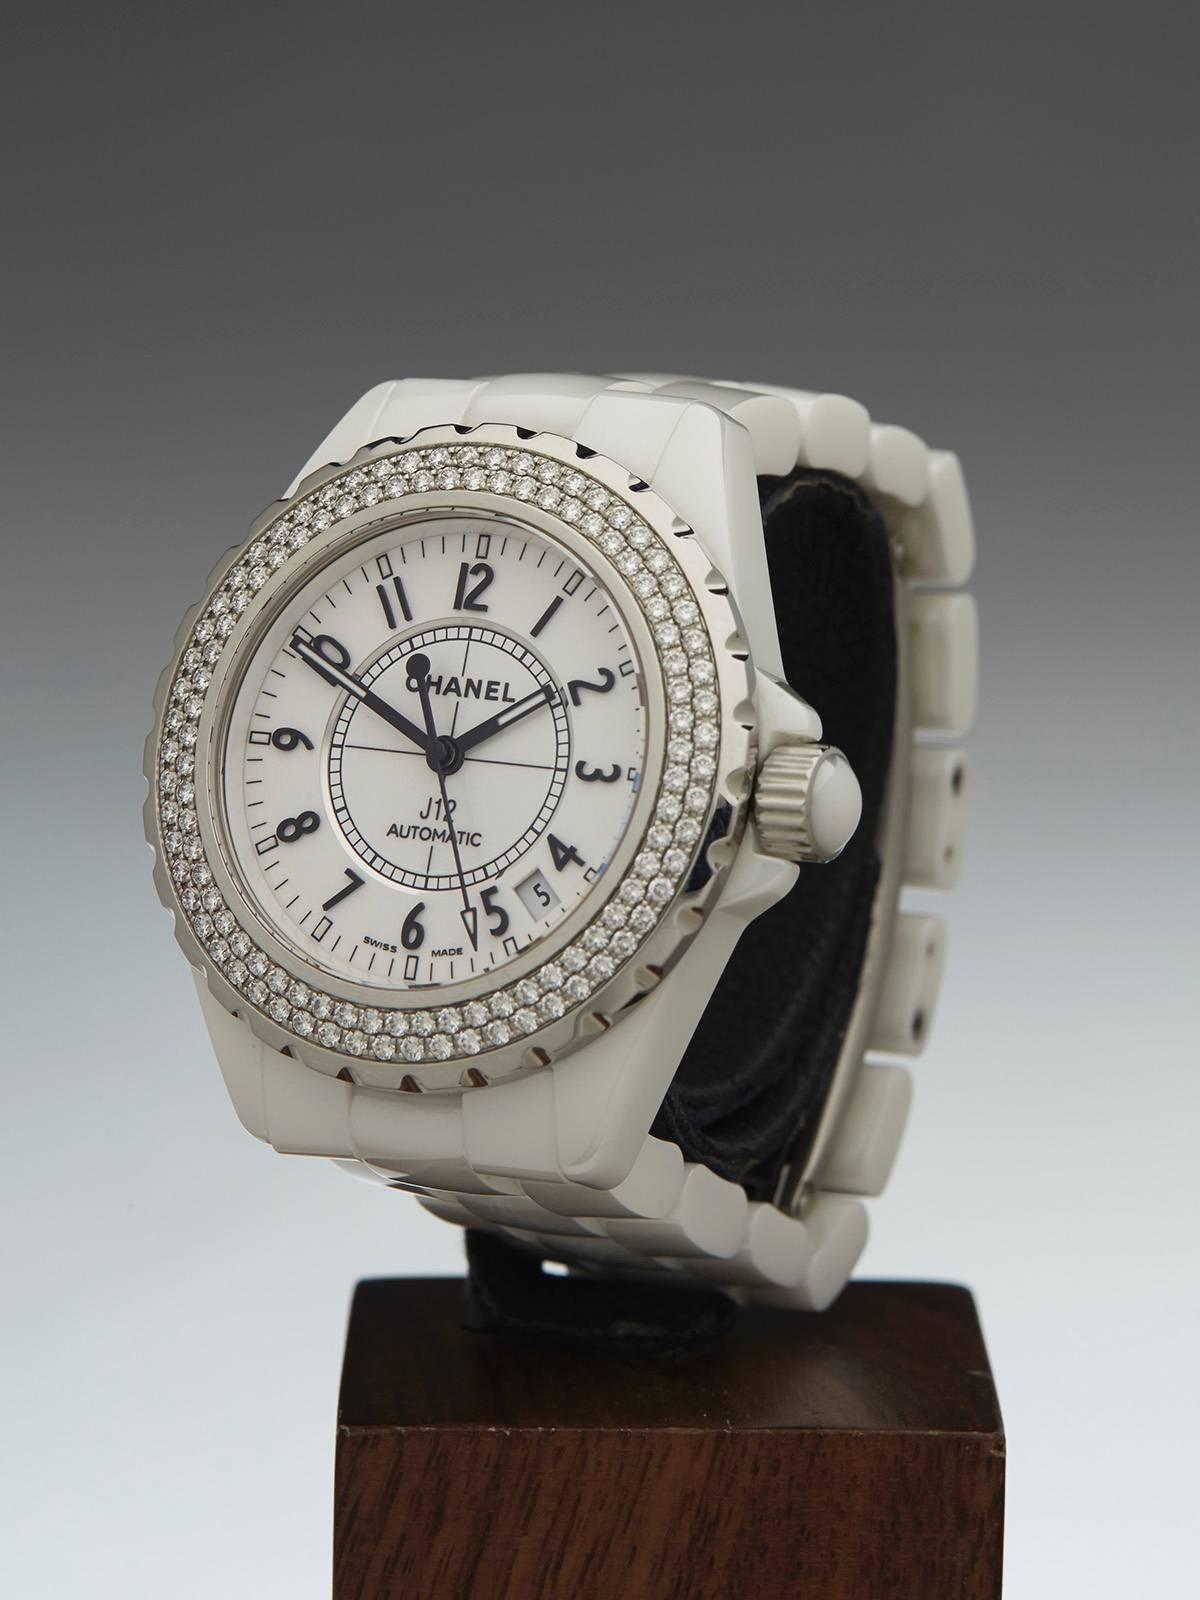 Specifications

Movement: Automatic
Case: Stainless Steel 
Case Diameter: 38mm 
Dial: White 
Bracelet: White Ceramic 
Strap Length: Adjustable up to 16cm 
Strap Width: At Case - 19mm/At Buckle - 17mm 
Buckle: White Ceramic Deployment